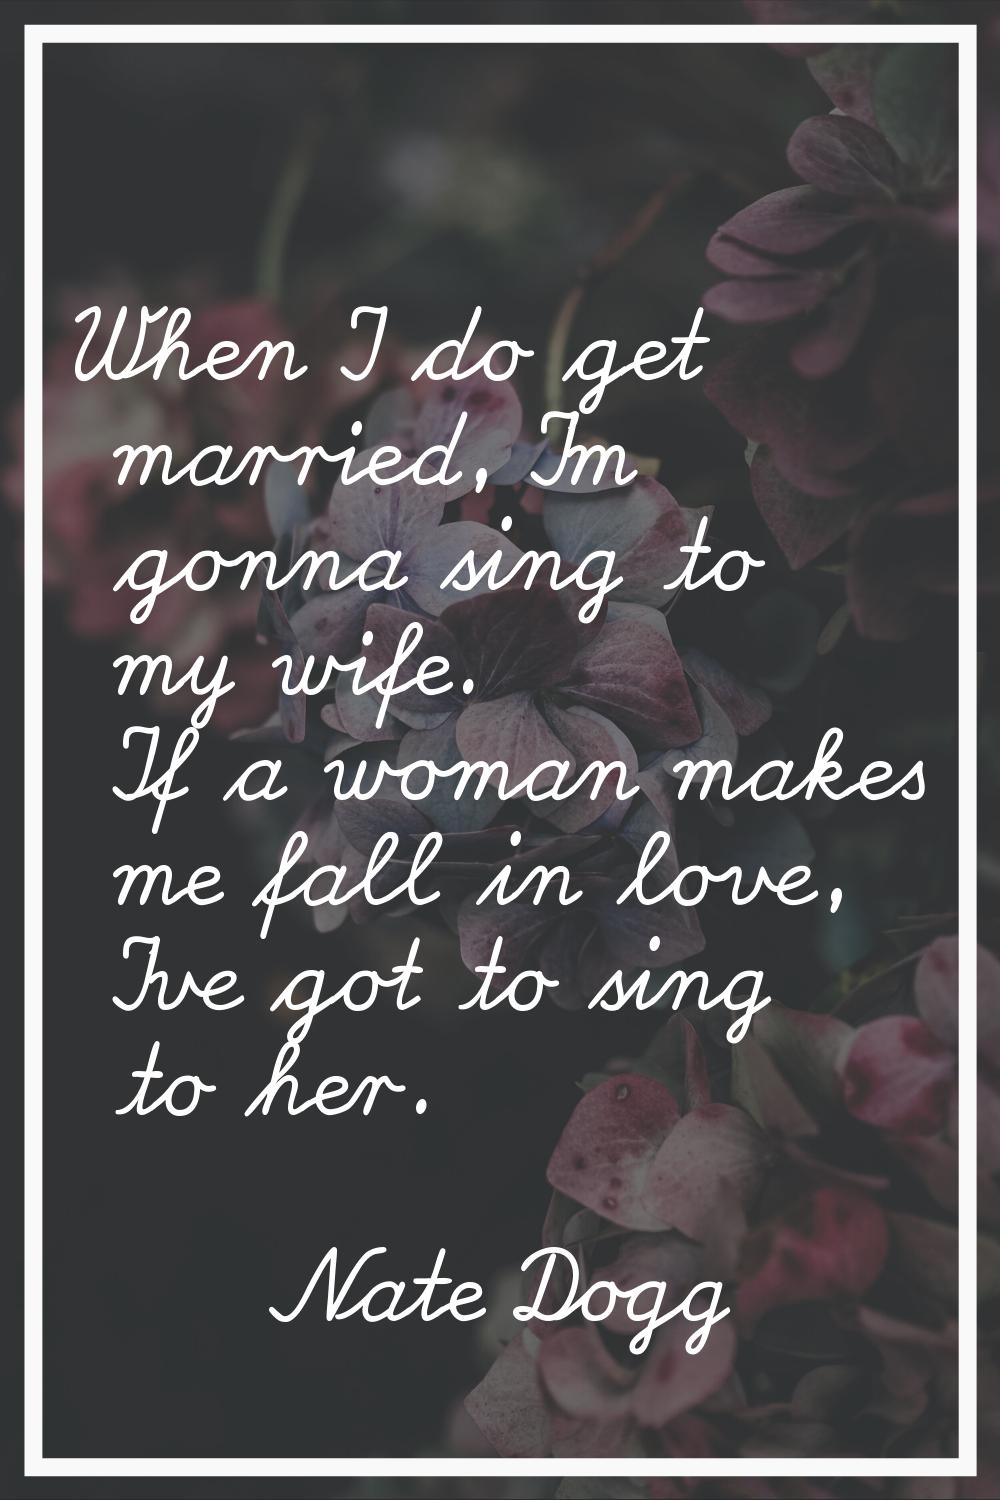 When I do get married, I'm gonna sing to my wife. If a woman makes me fall in love, I've got to sin